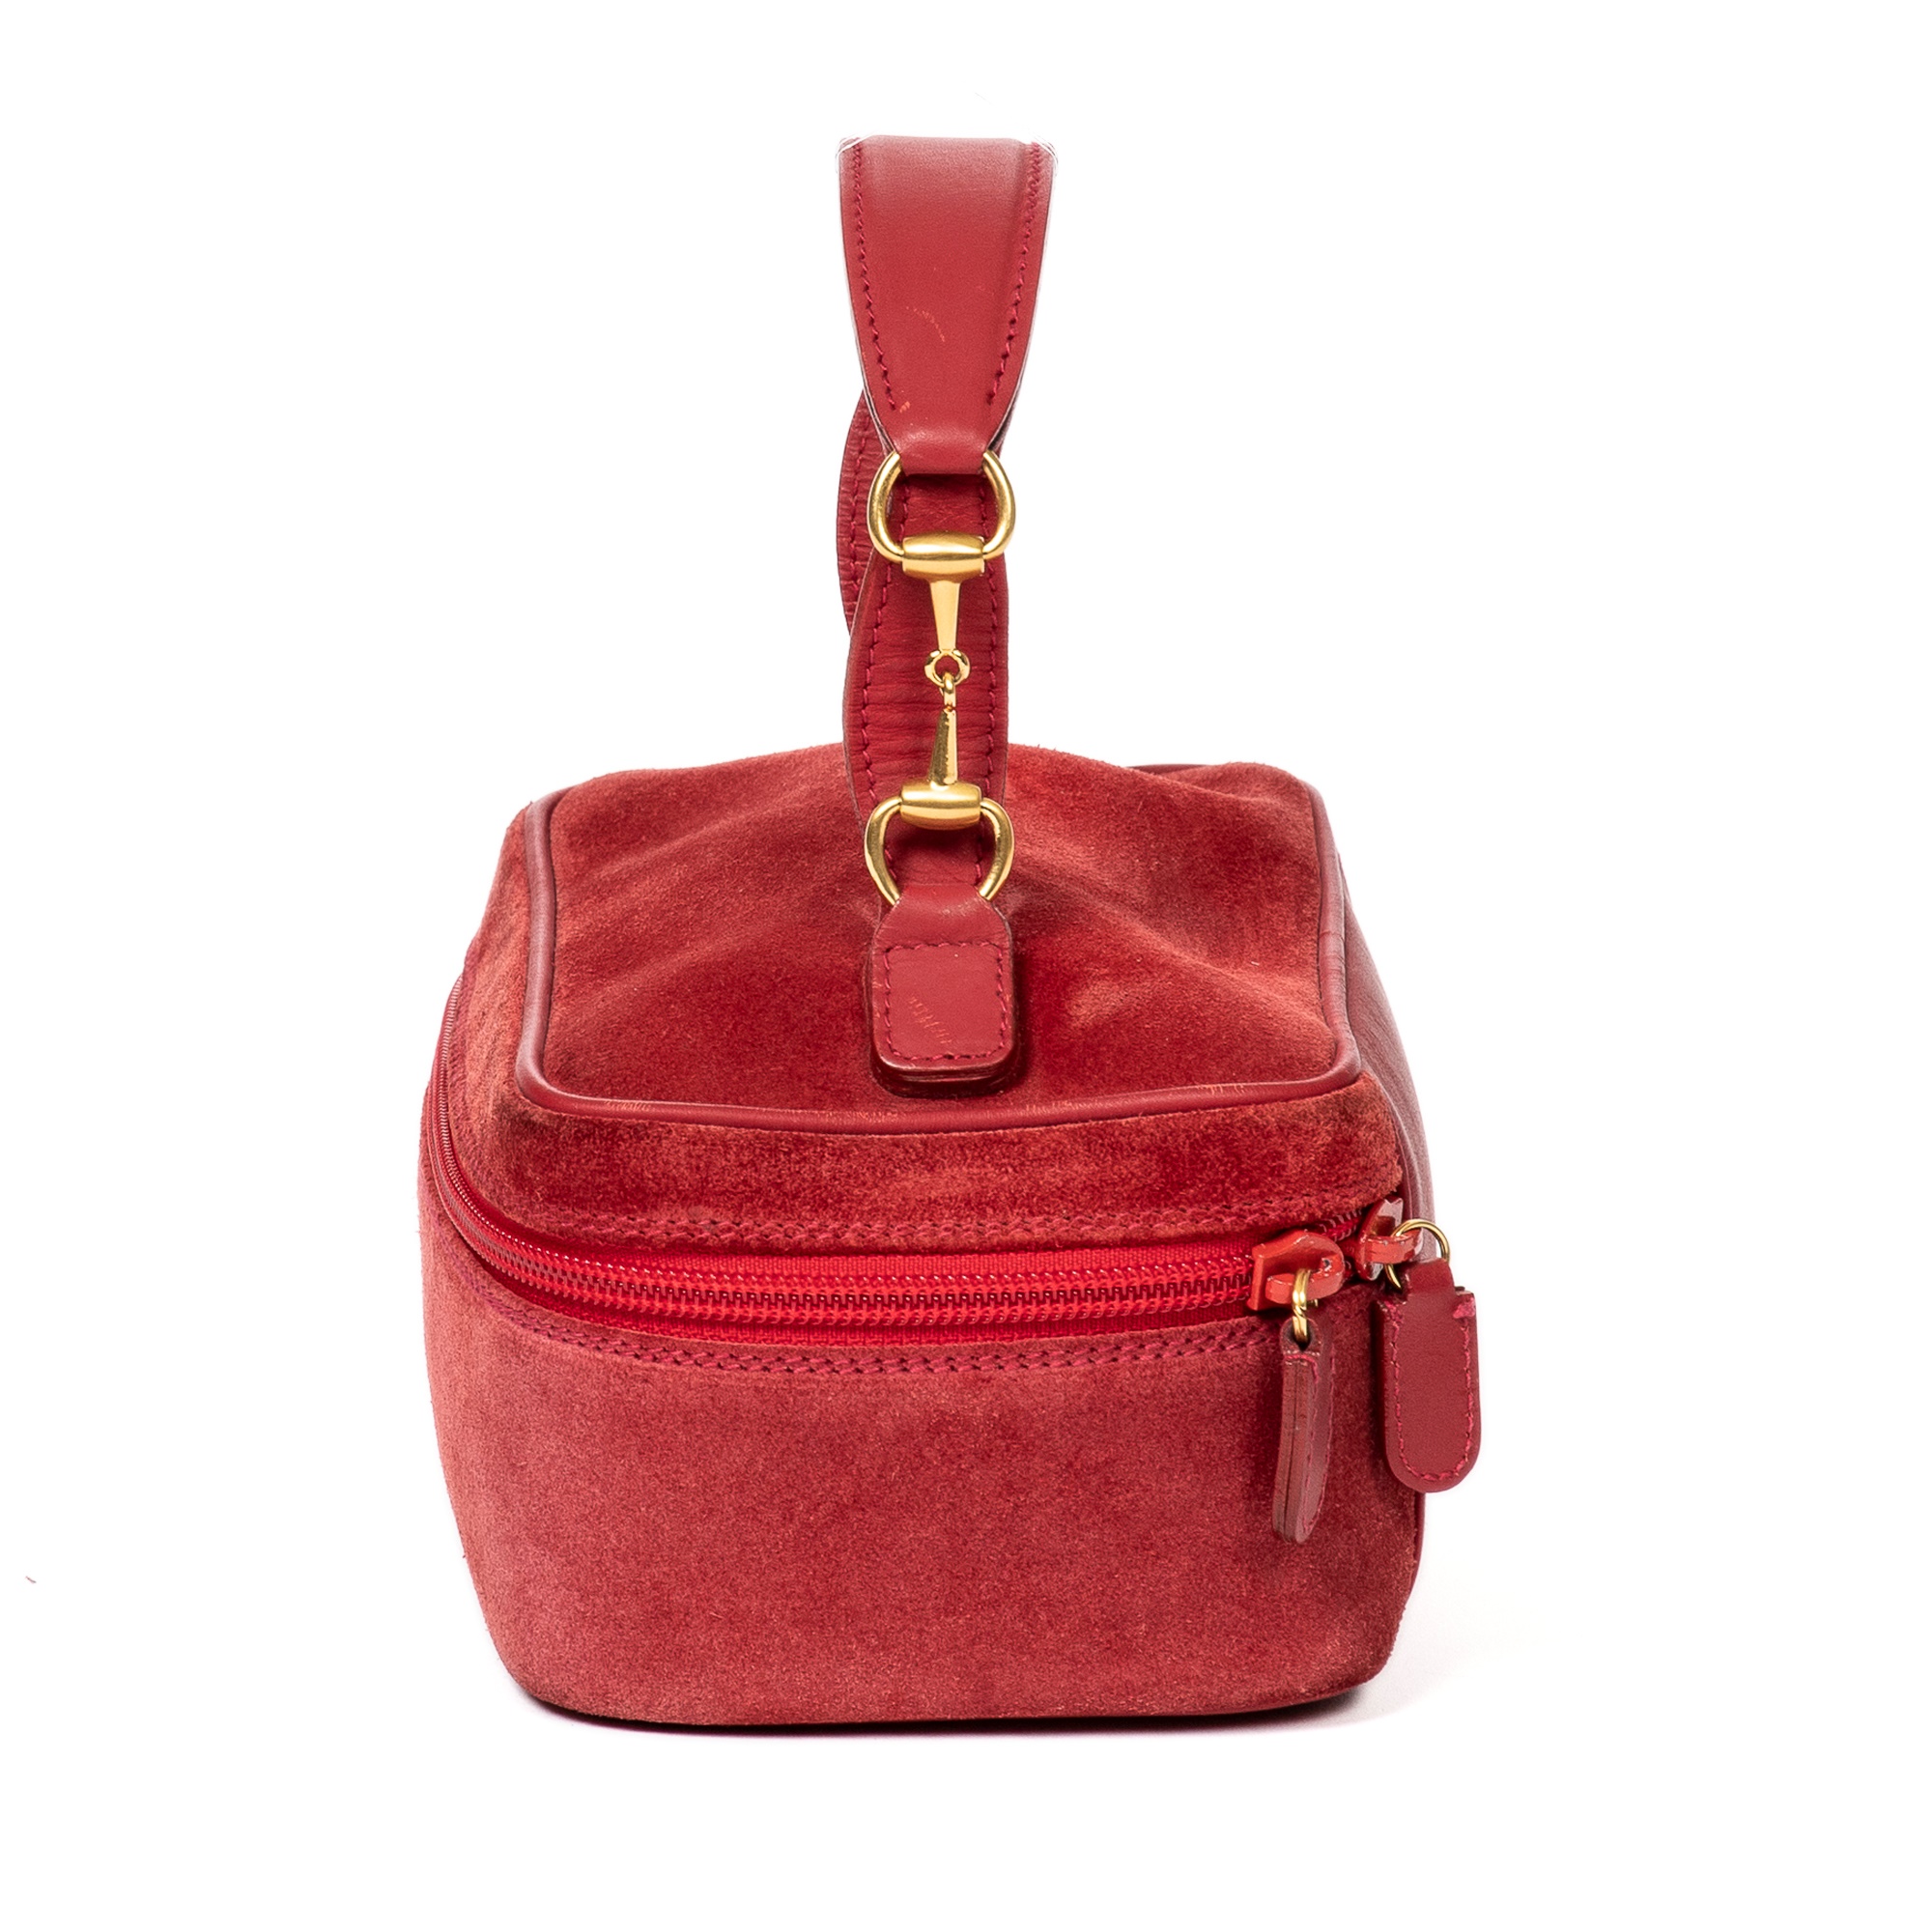 Gucci Red Suede Horsebit Cosmetic Case - Image 3 of 7